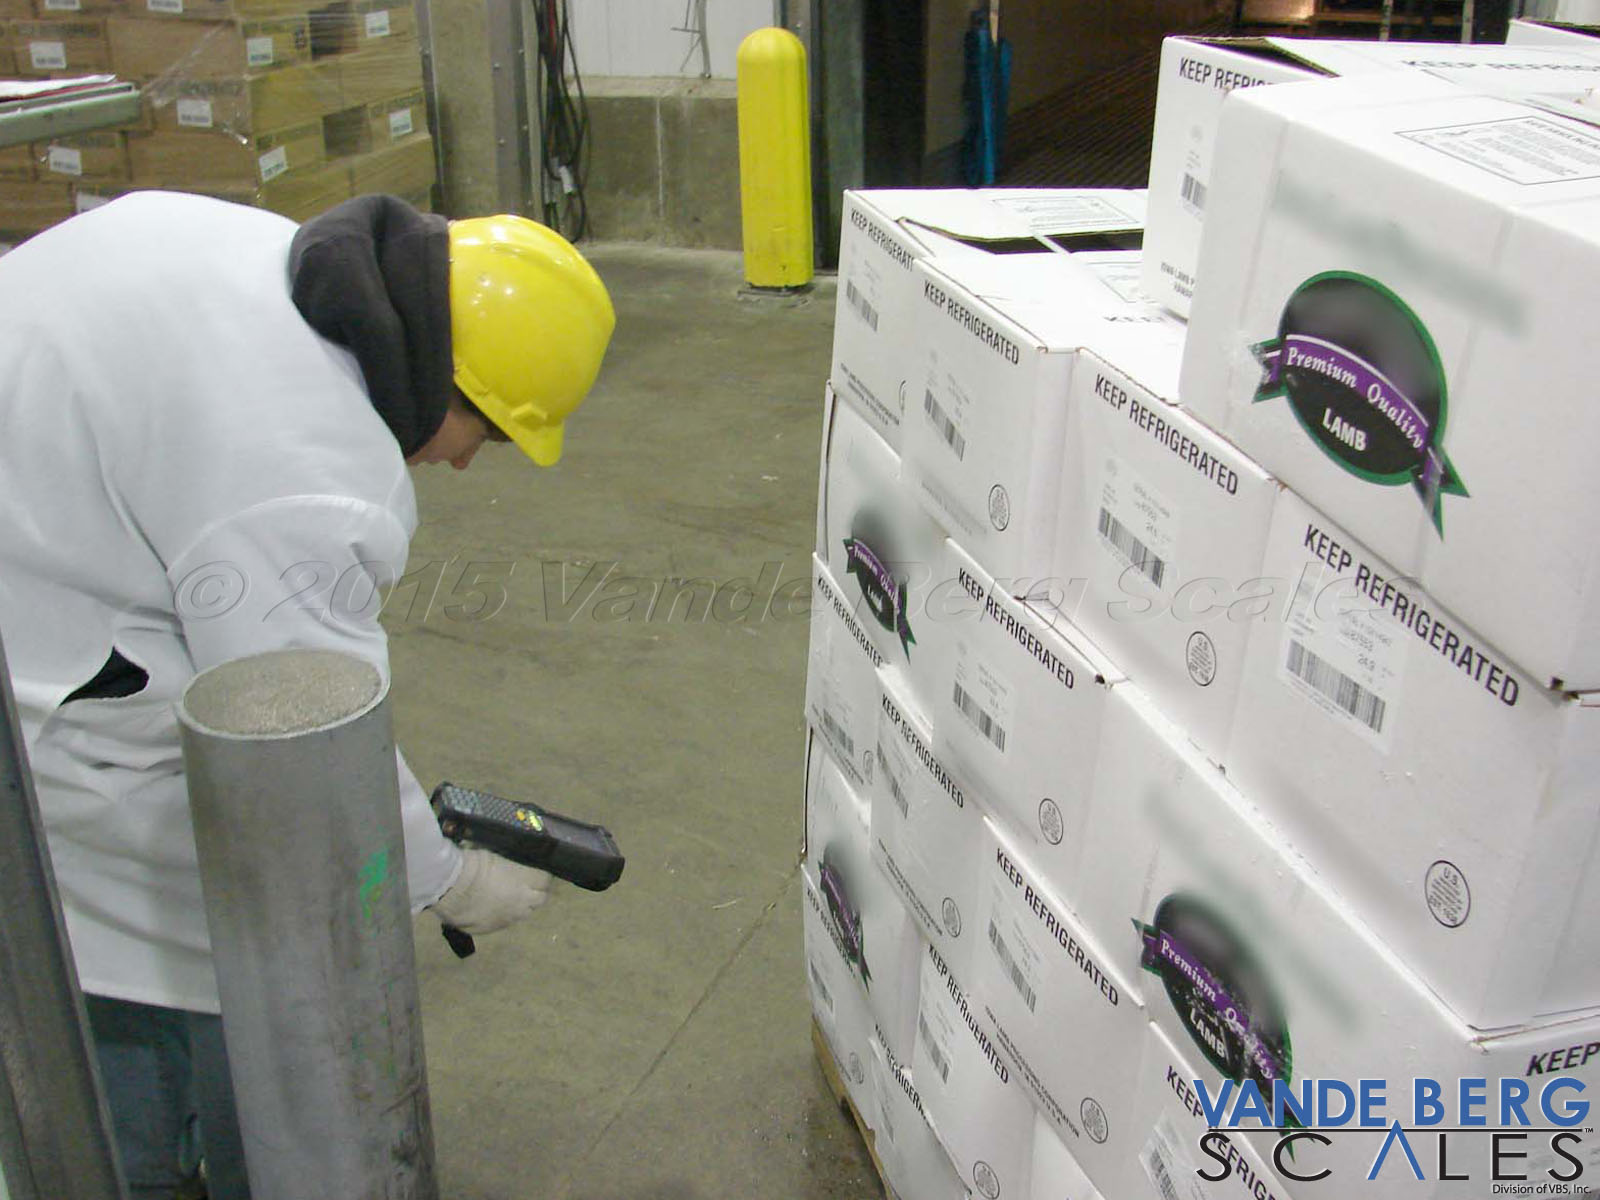 Operator scanning offal box barcodes